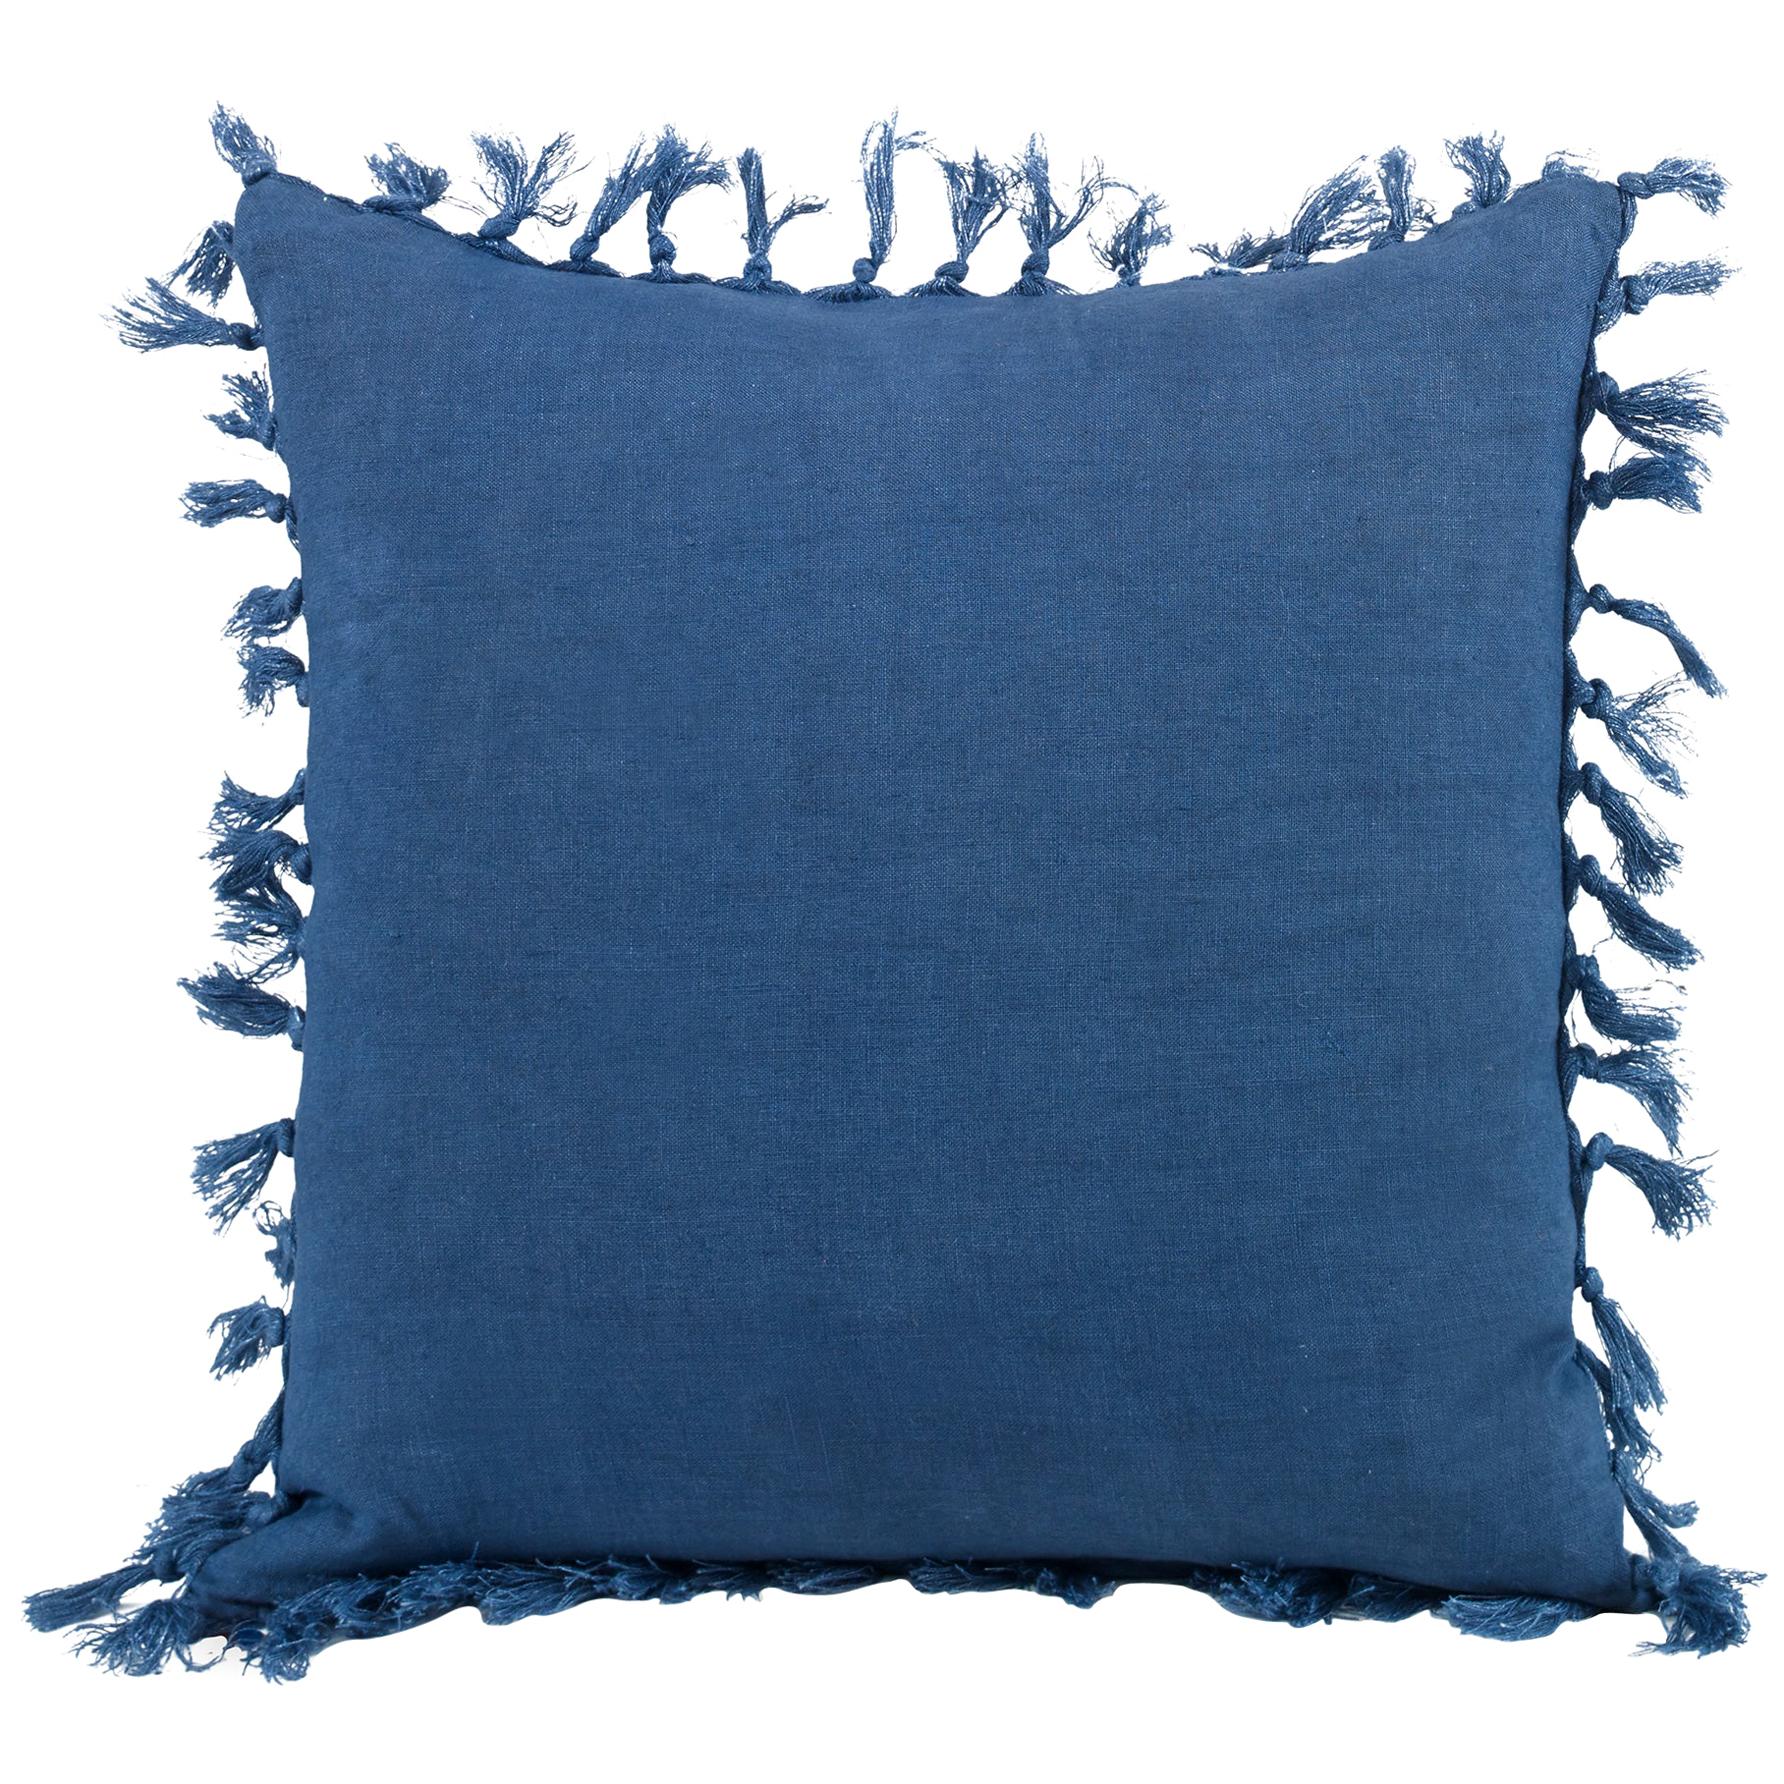 Blue (QR-19255.NAVY.0) Zoysia Linen Decorative Accent Pillow with Fringe by CuratedKravet